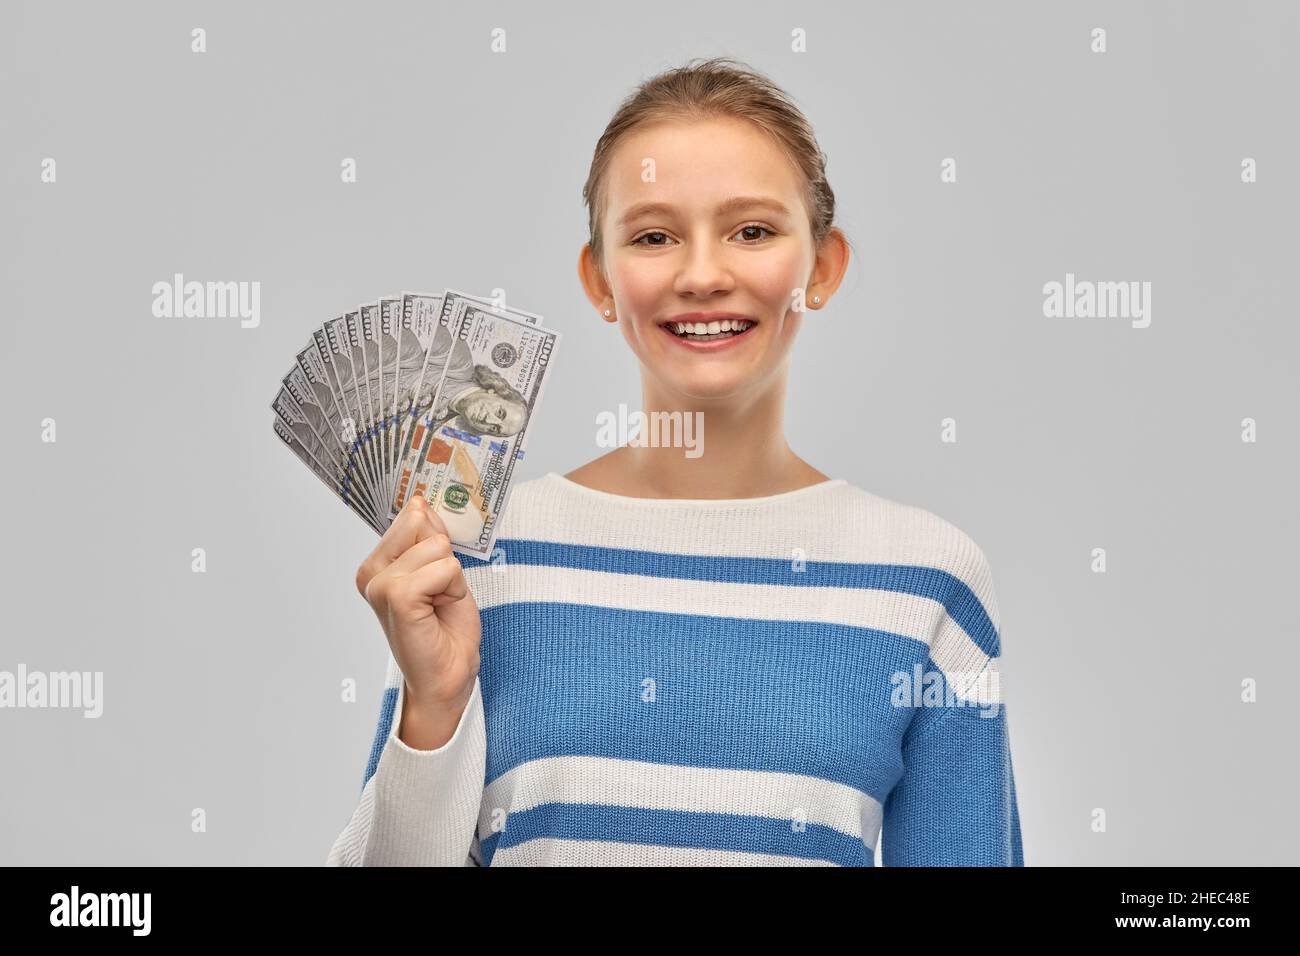 smiling teenage girl with dollar money banknotes Stock Photo